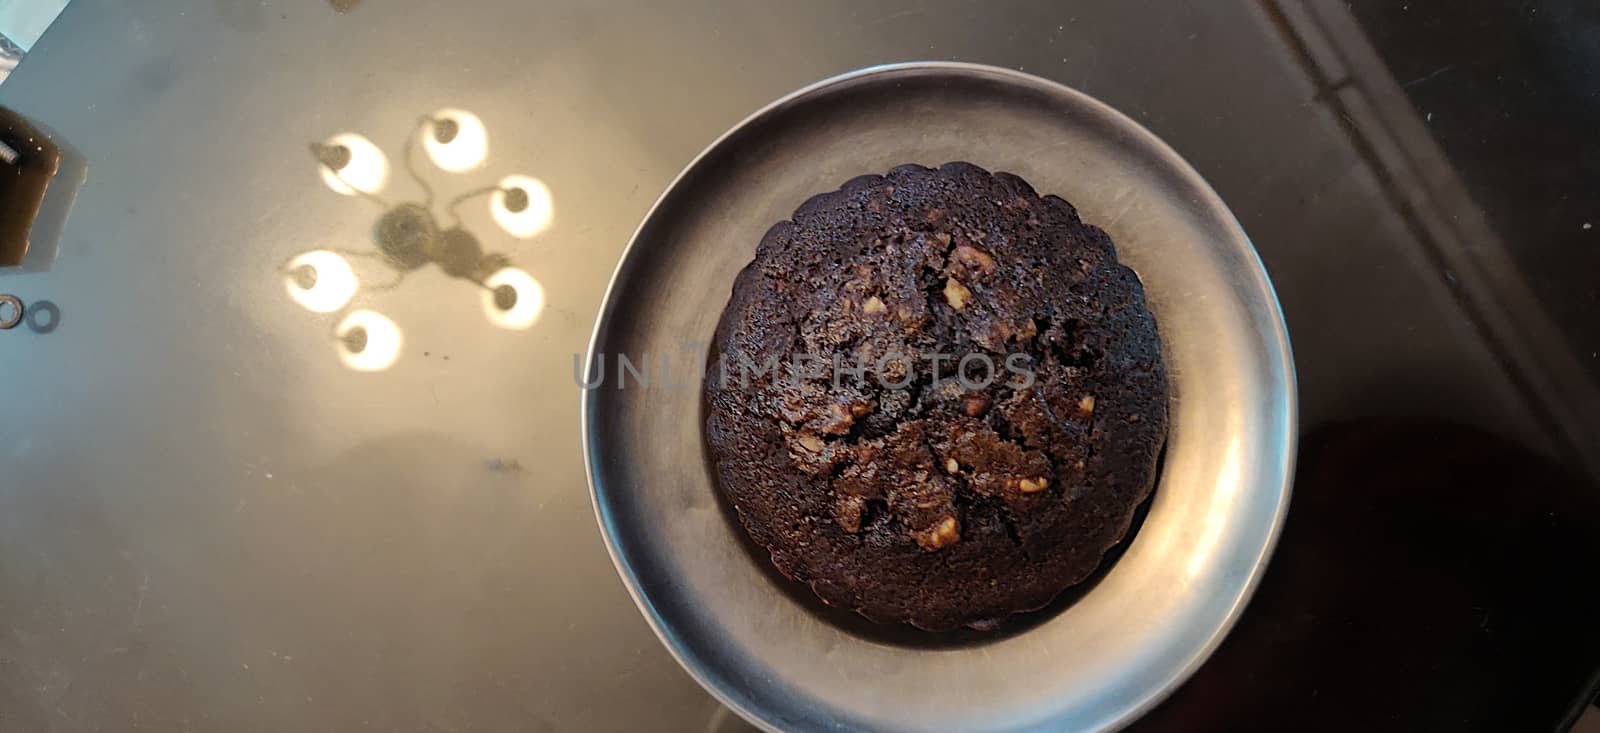 A chocolate walnut muffin on a steel plate against a reflective surface by mshivangi92